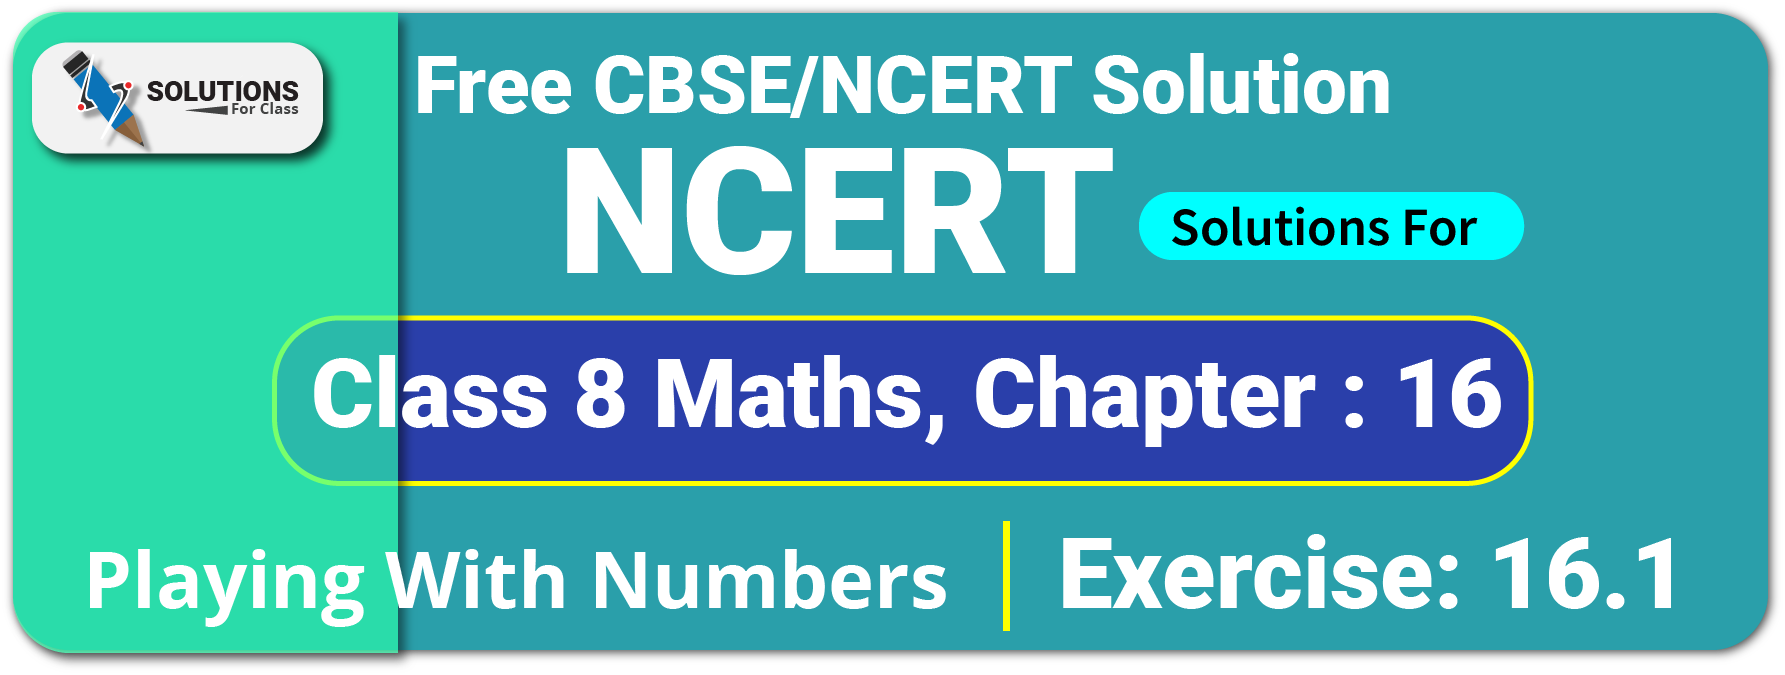 NCERT Solutions For Class 8 Chapter 16, Playing with Numbers, Exercise16.1